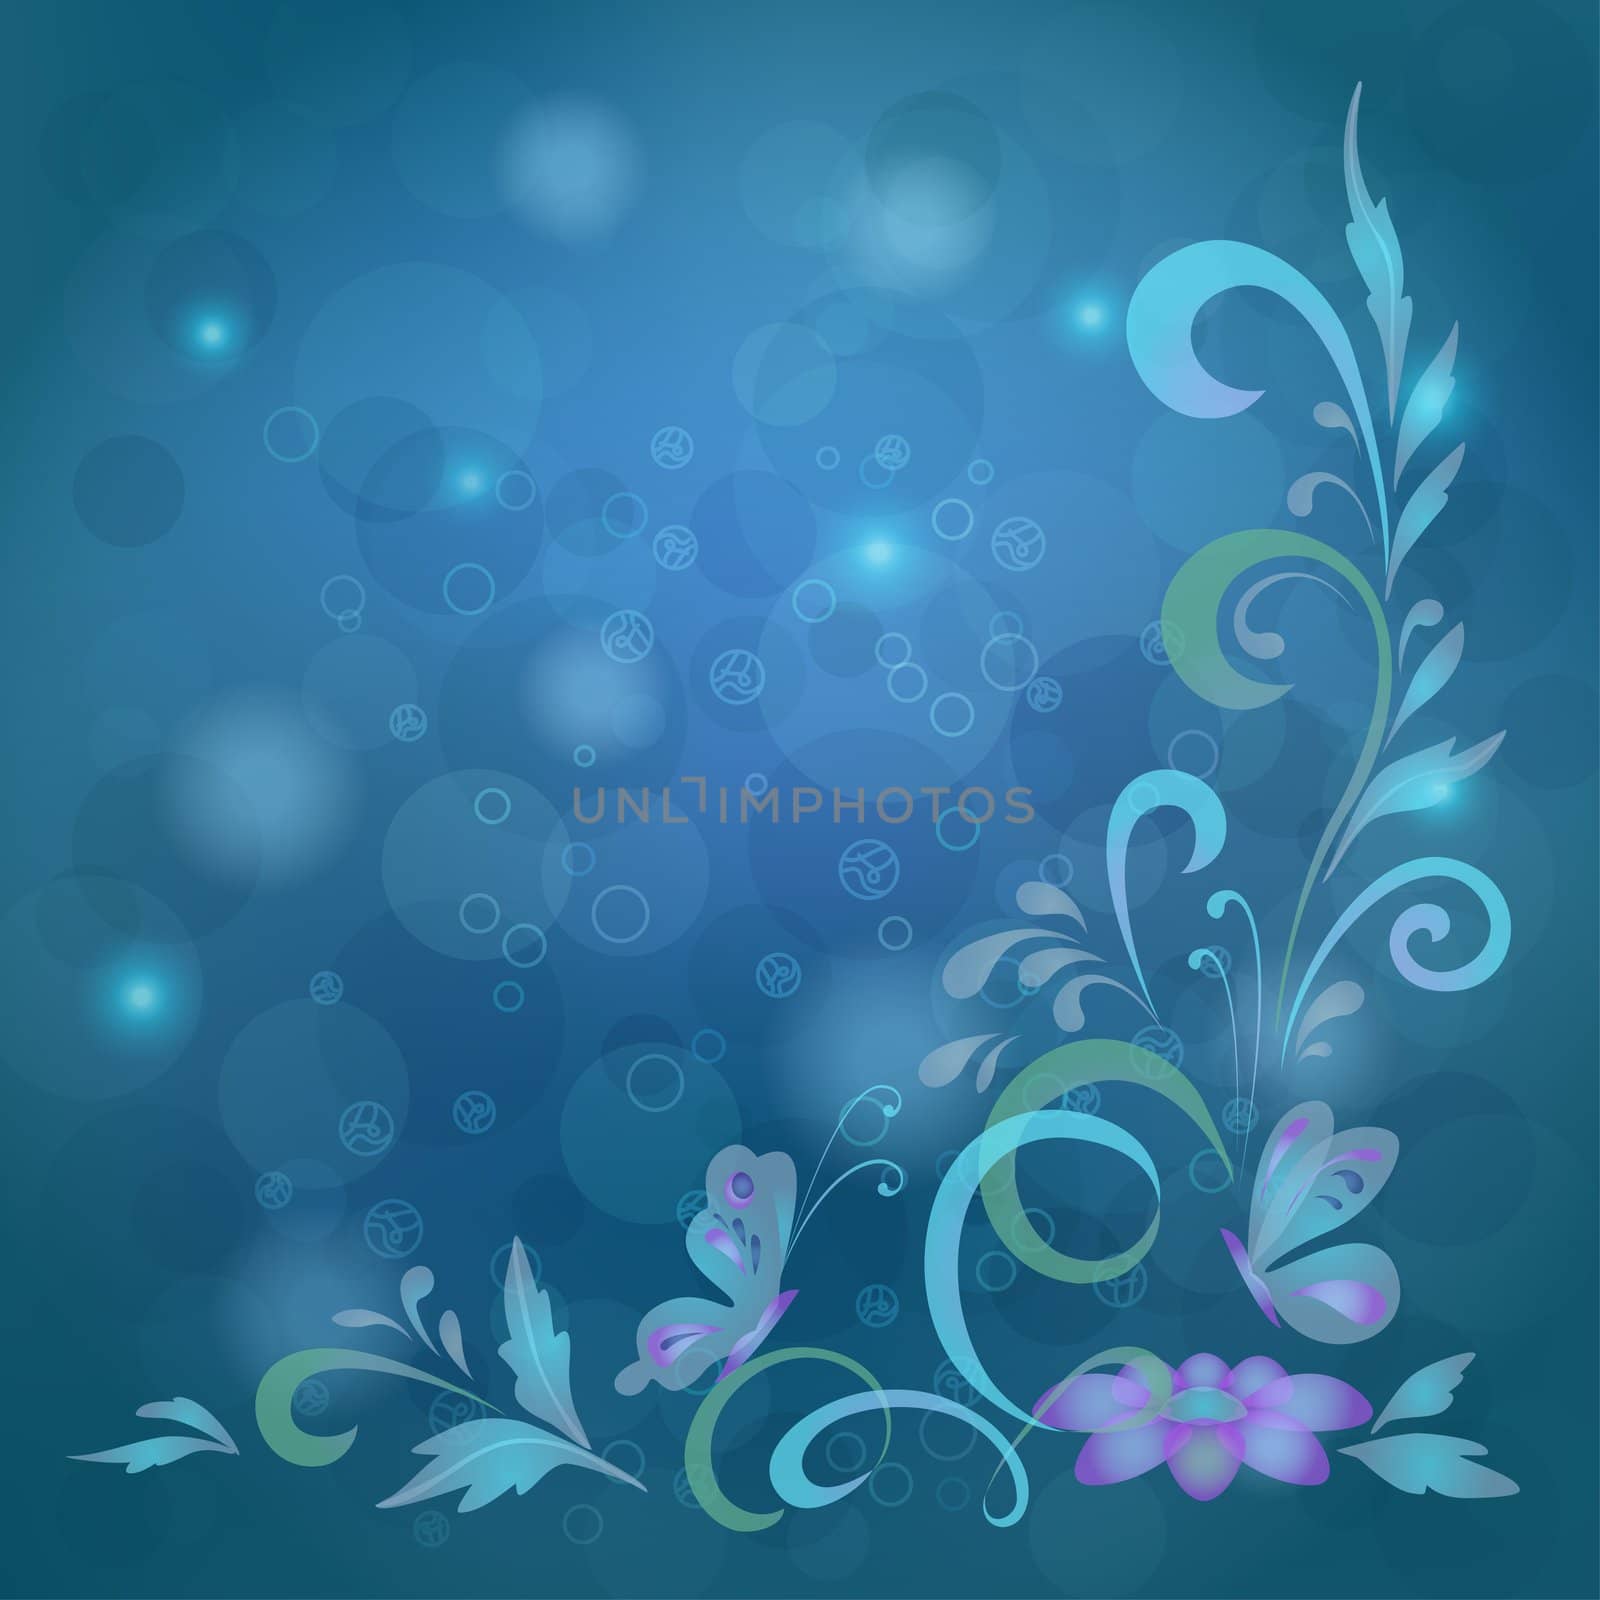 Abstract blue background with butterflies, flowers and circles